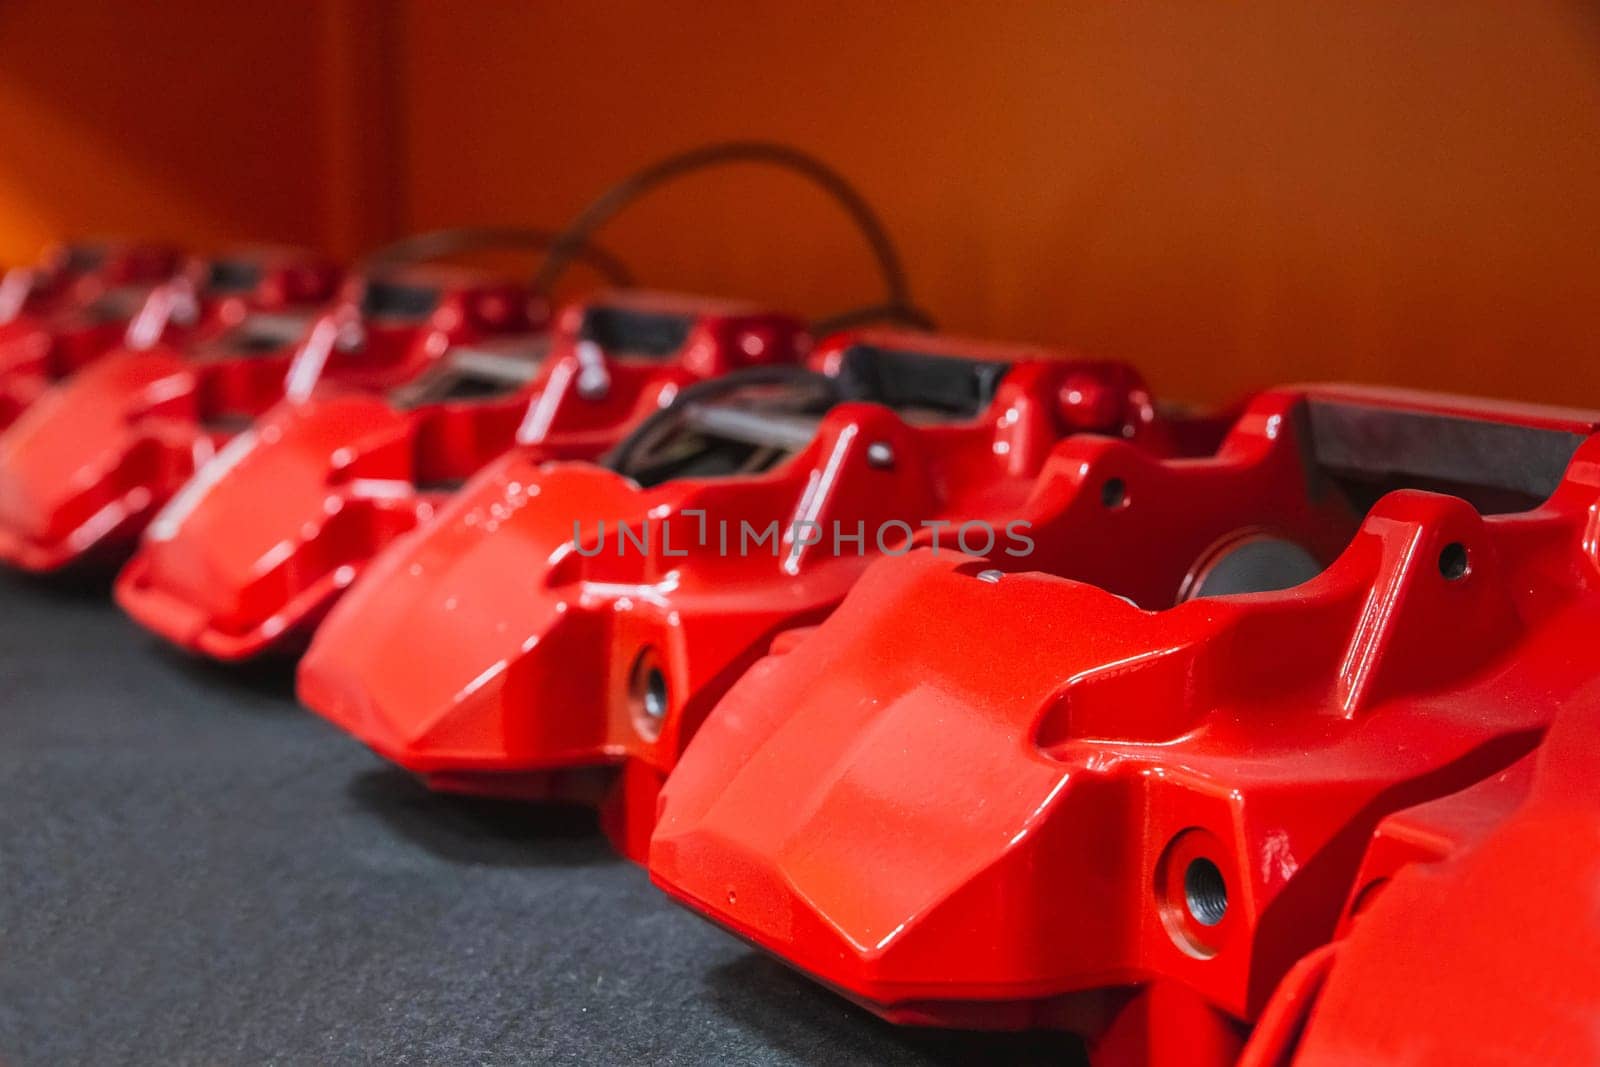 red car supports which are used in brakes lie in a row.